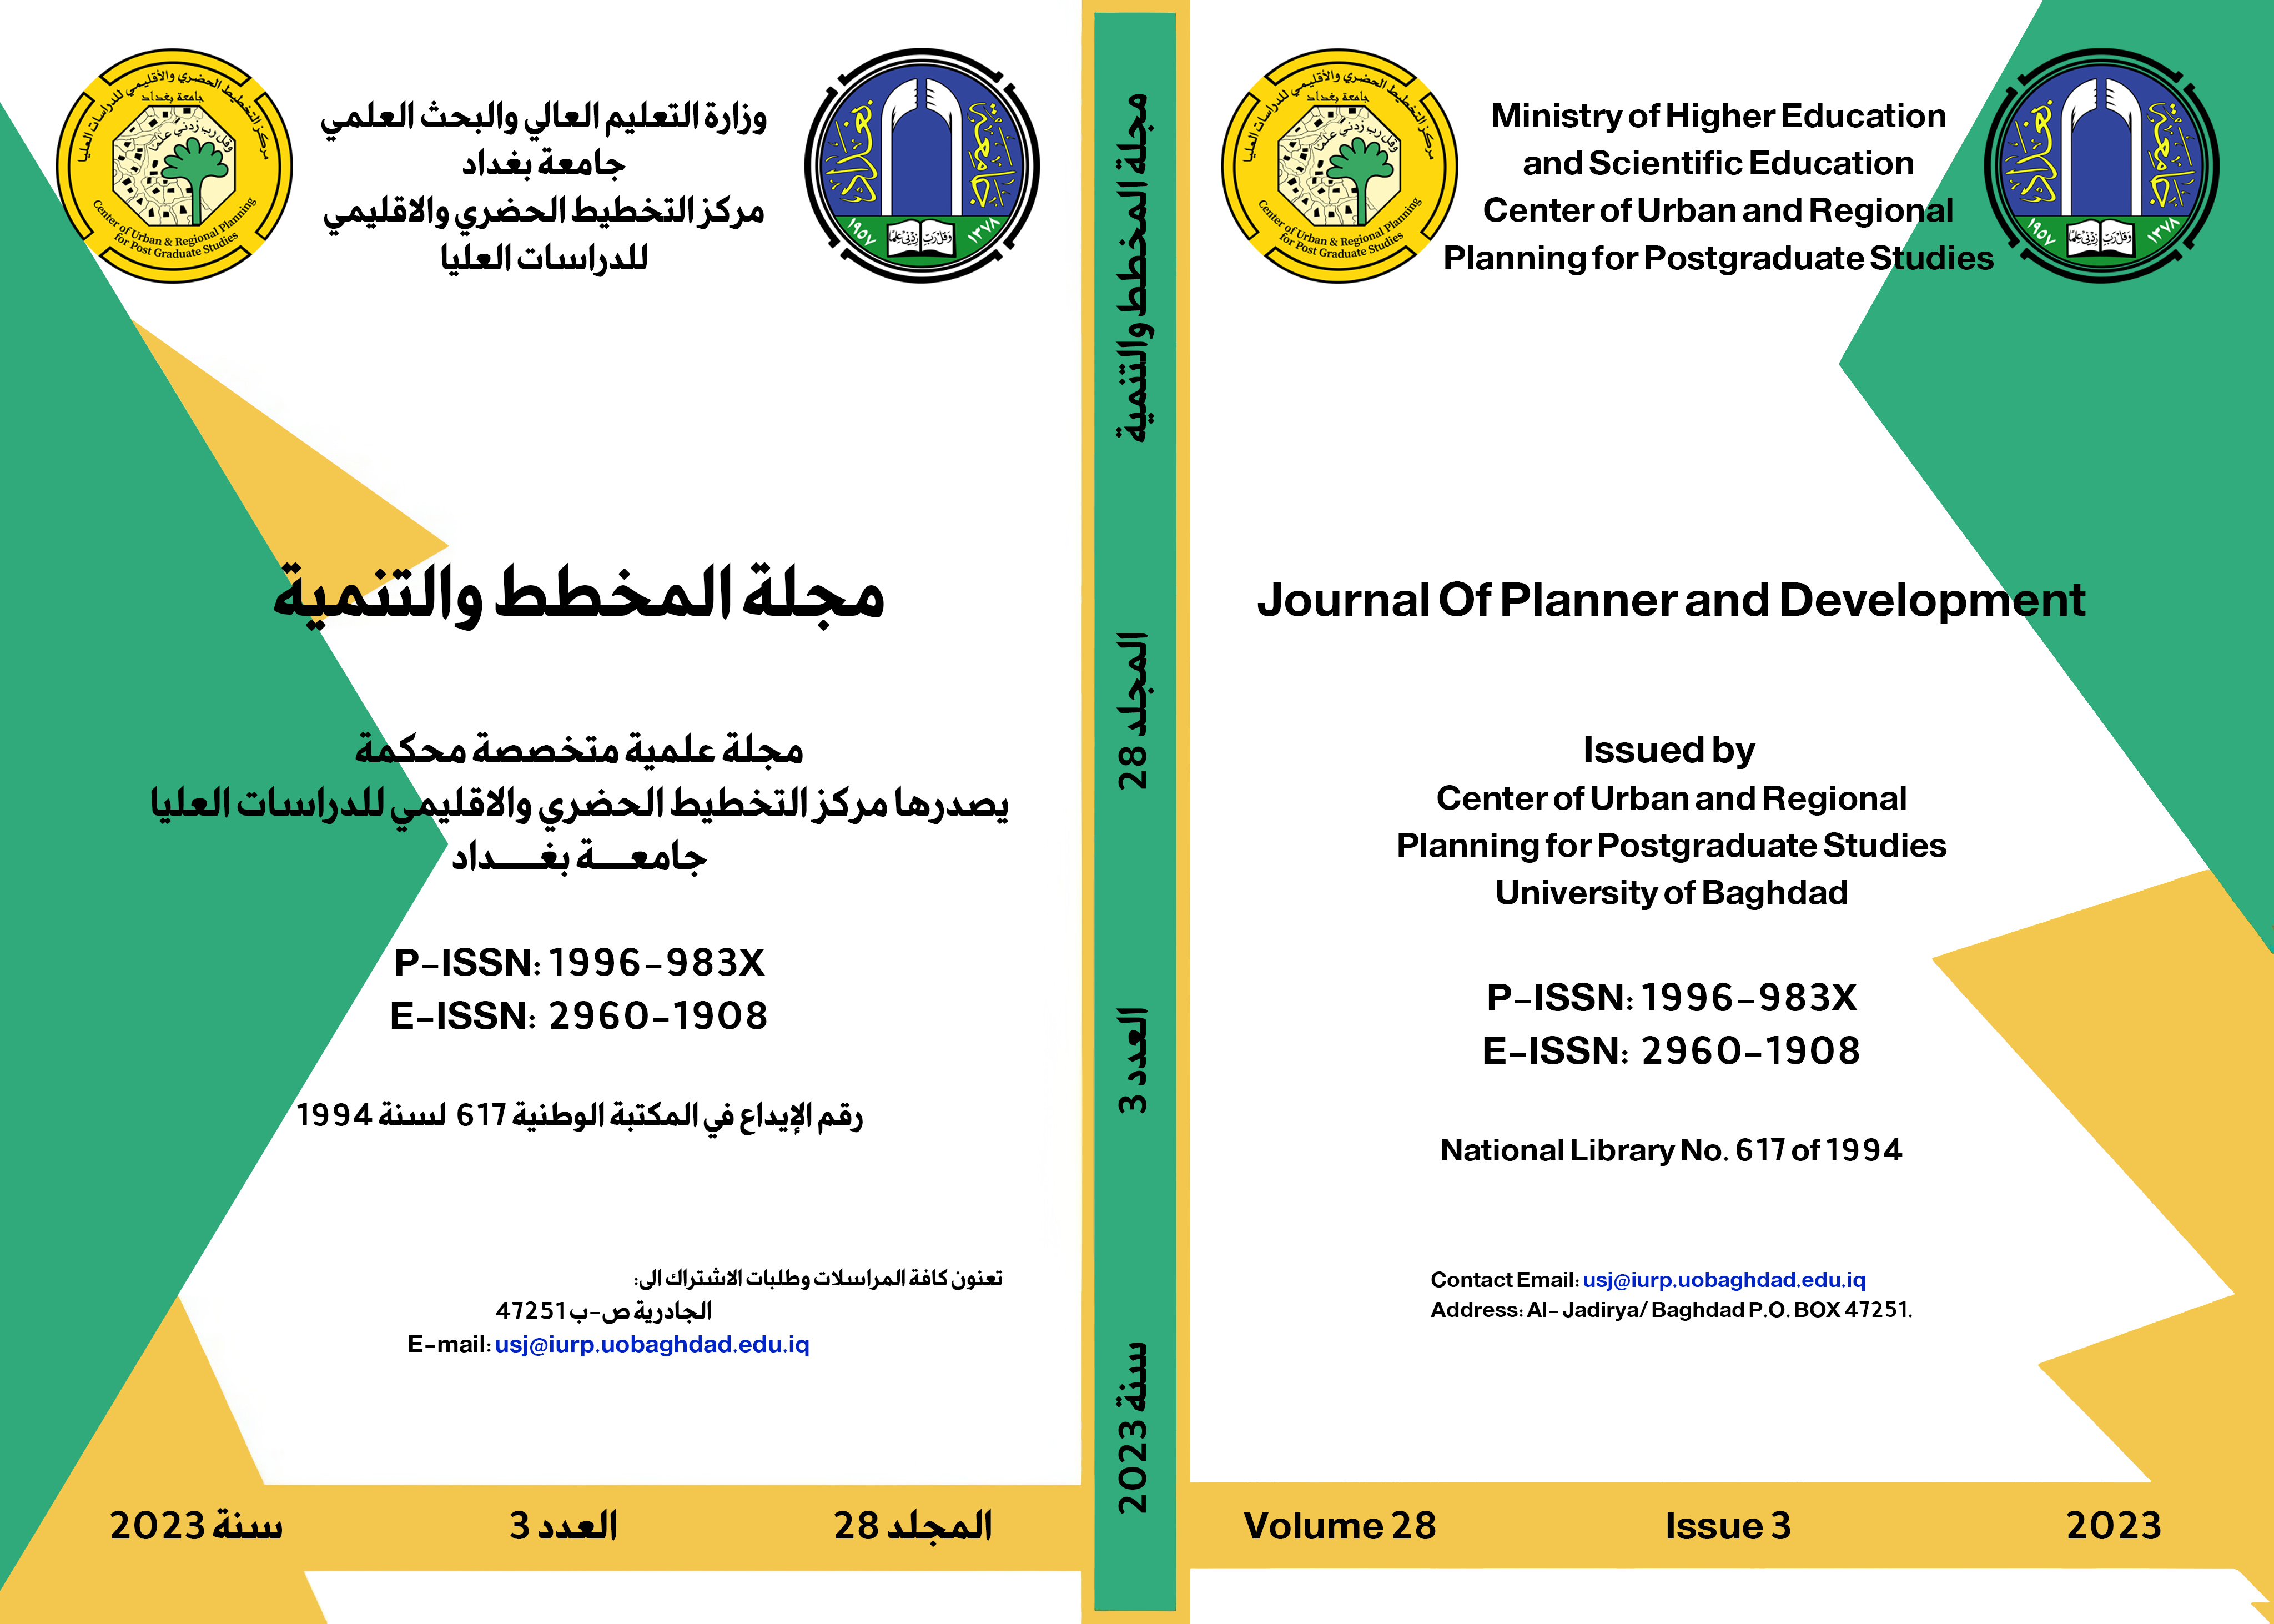 					View Vol. 28 No. 3 (2023): Journal of planner and development
				